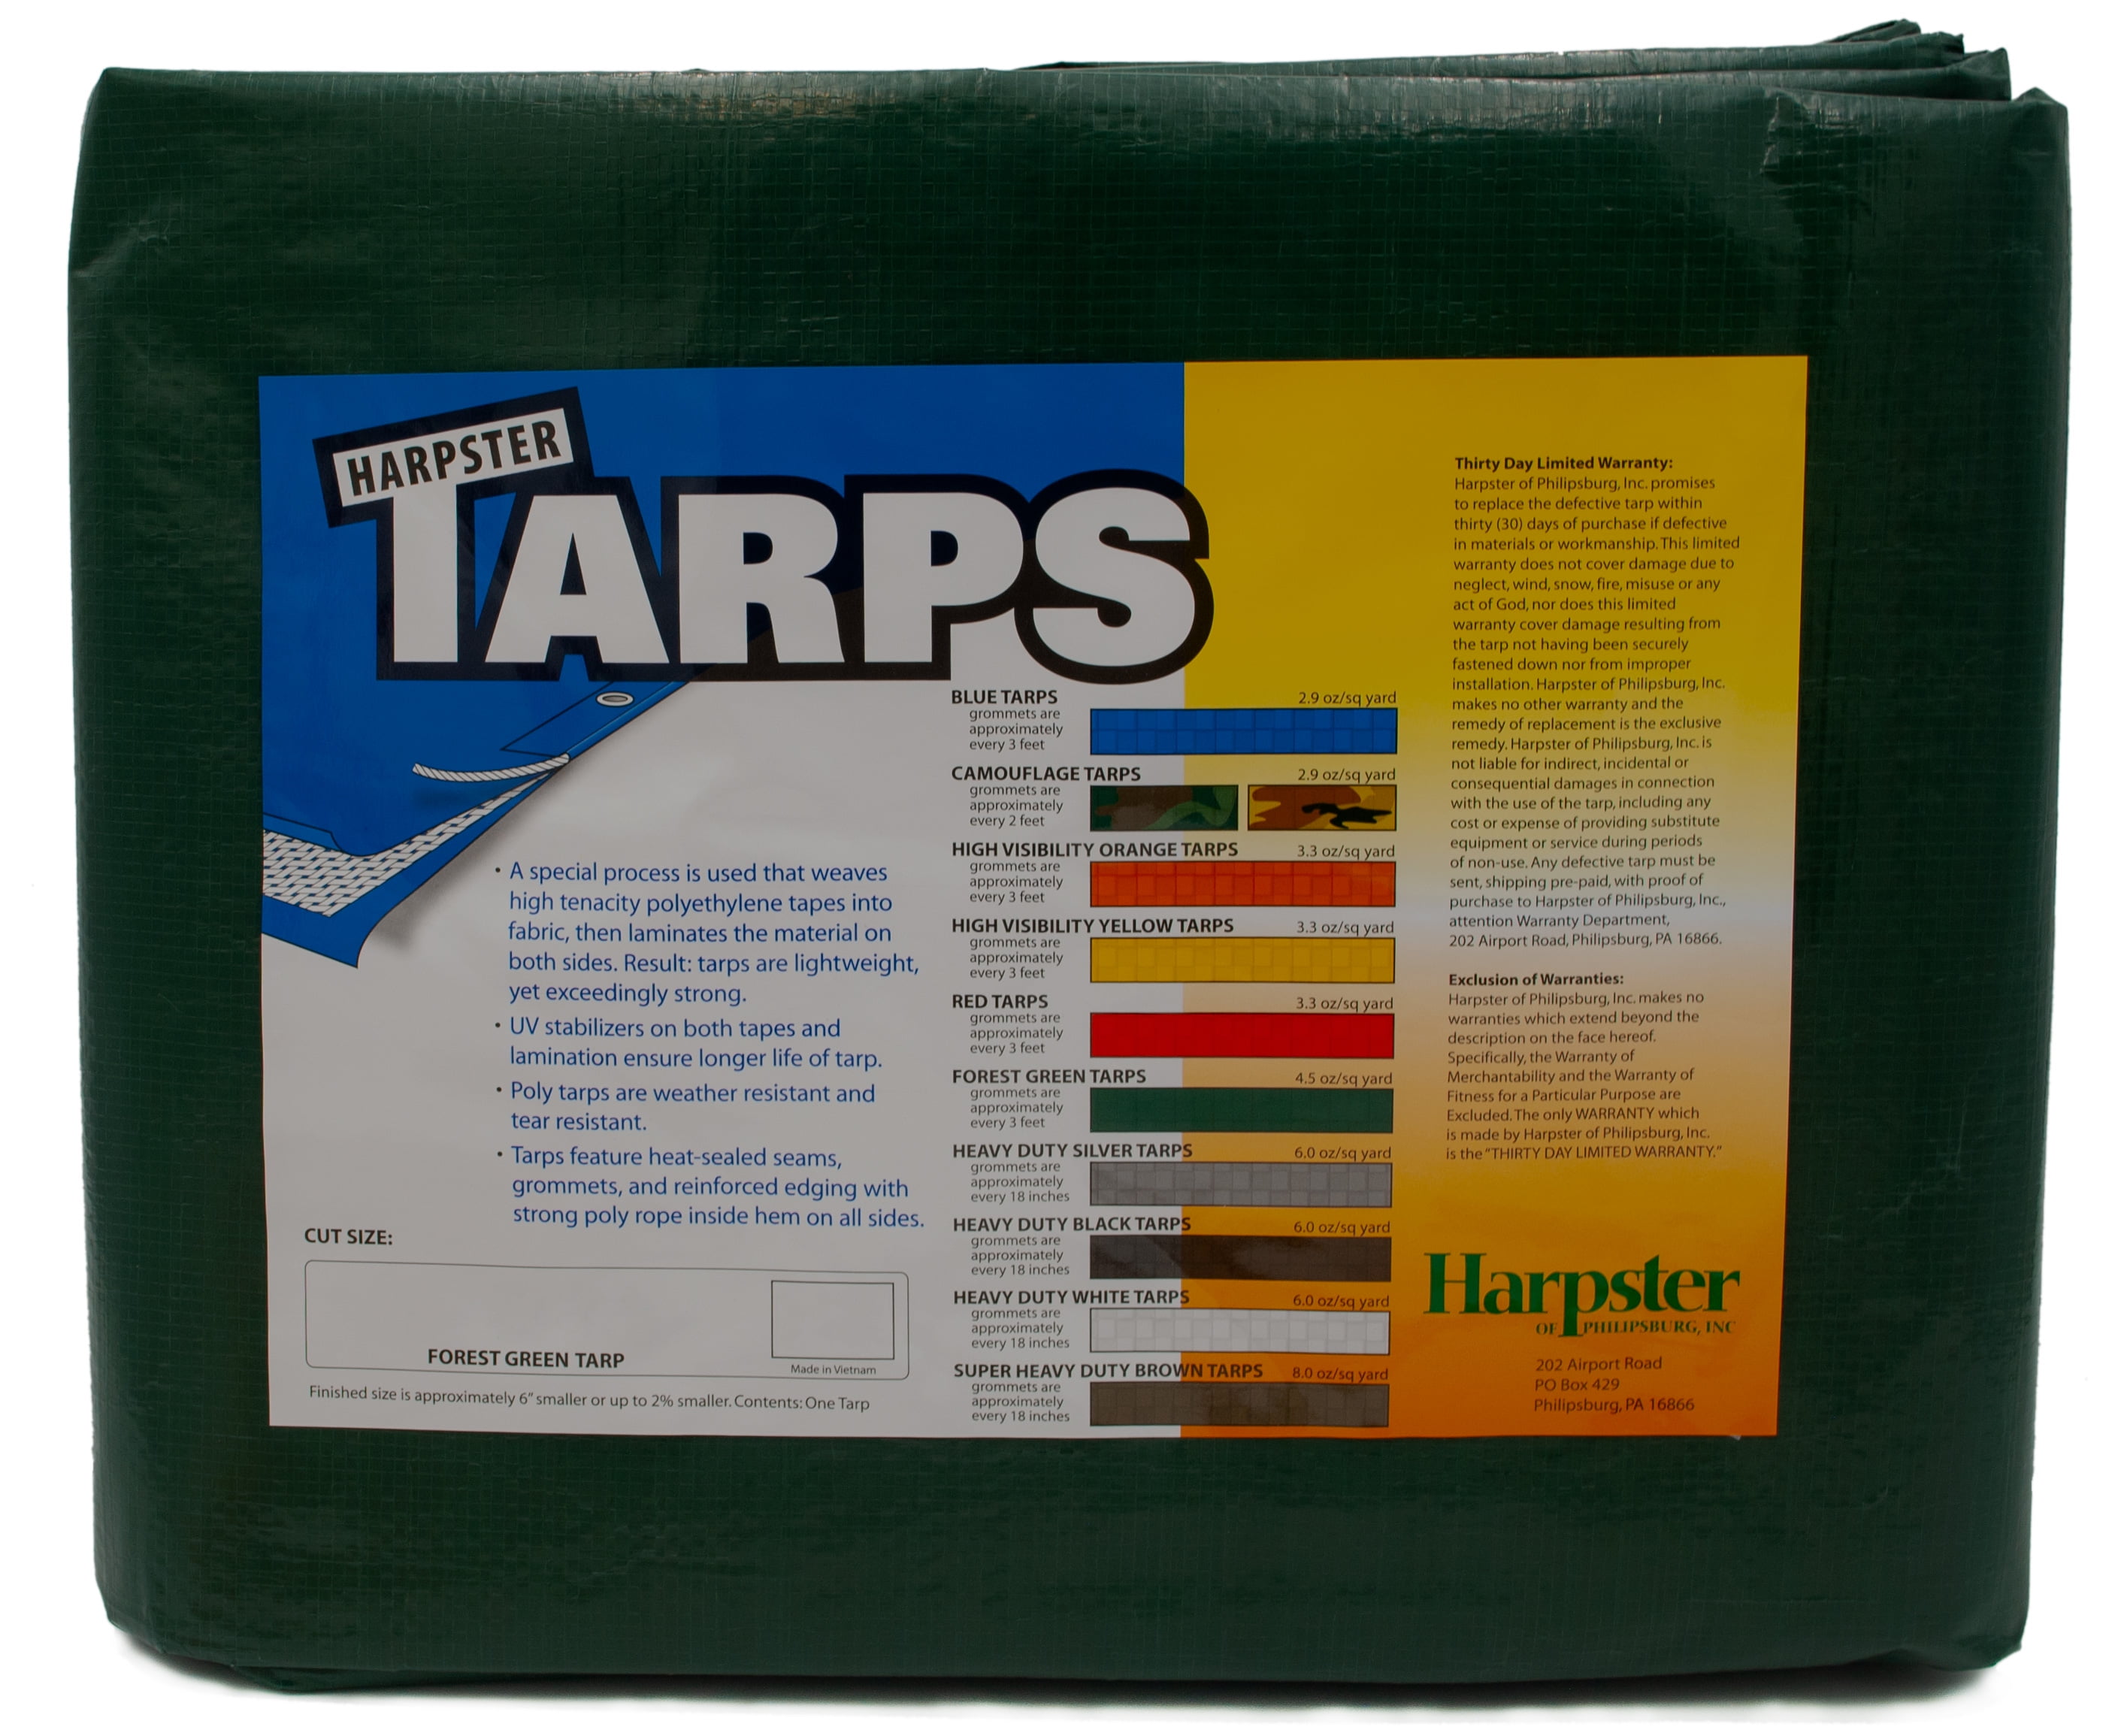 40 oz Black Vinyl Coated PVC Fabric by the Roll - Tarps Outlet